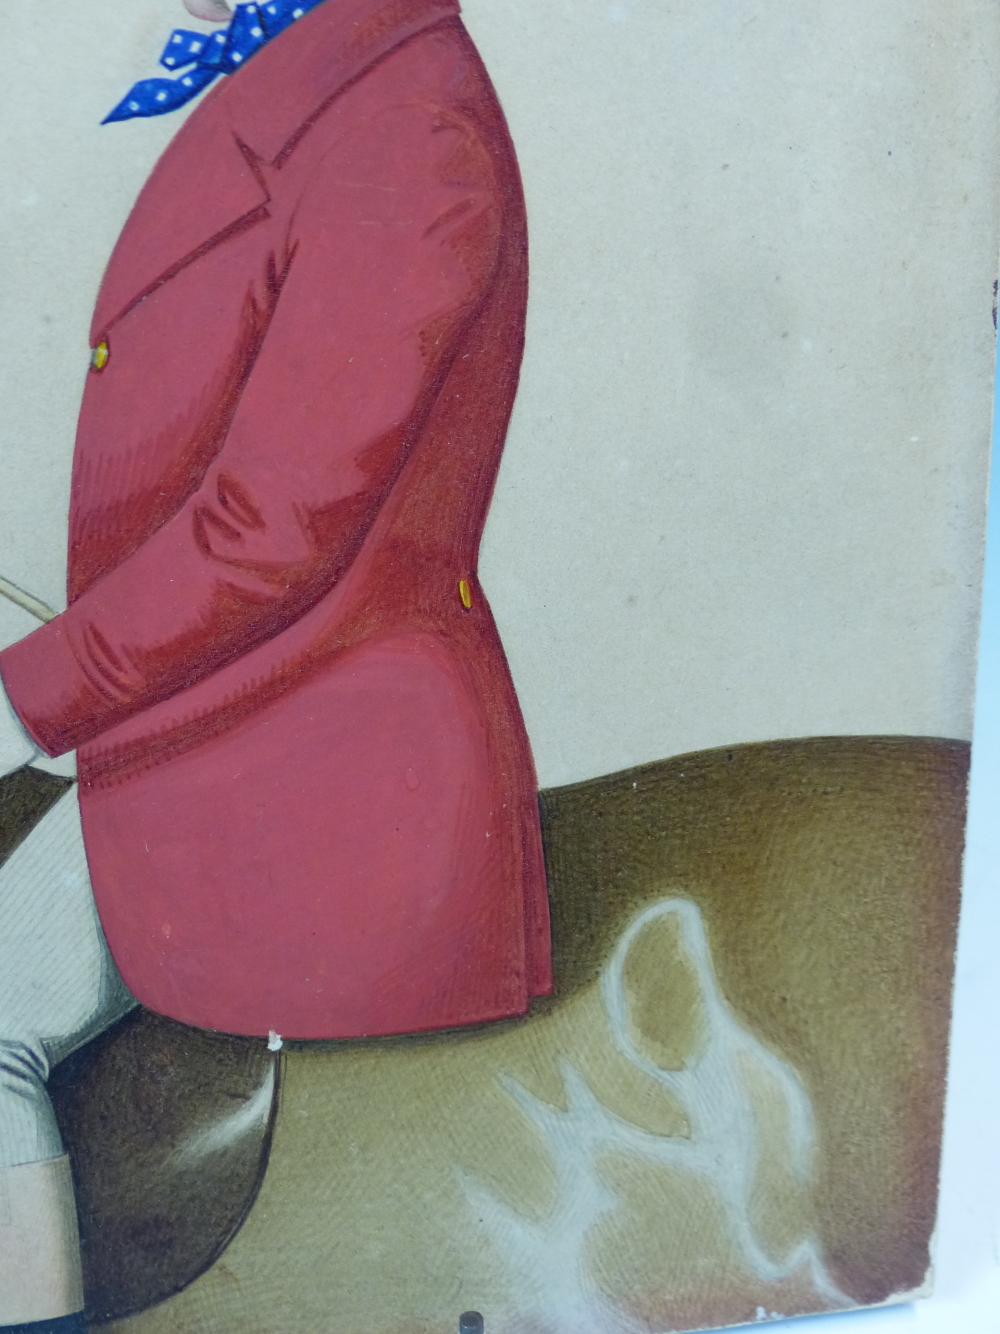 JOSHUA DIGHTON (1831-1908). MINIATURE PROFILE PORTRAIT OF A GENTLEMAN ON A HORSE WEARING A RED COAT. - Image 5 of 6